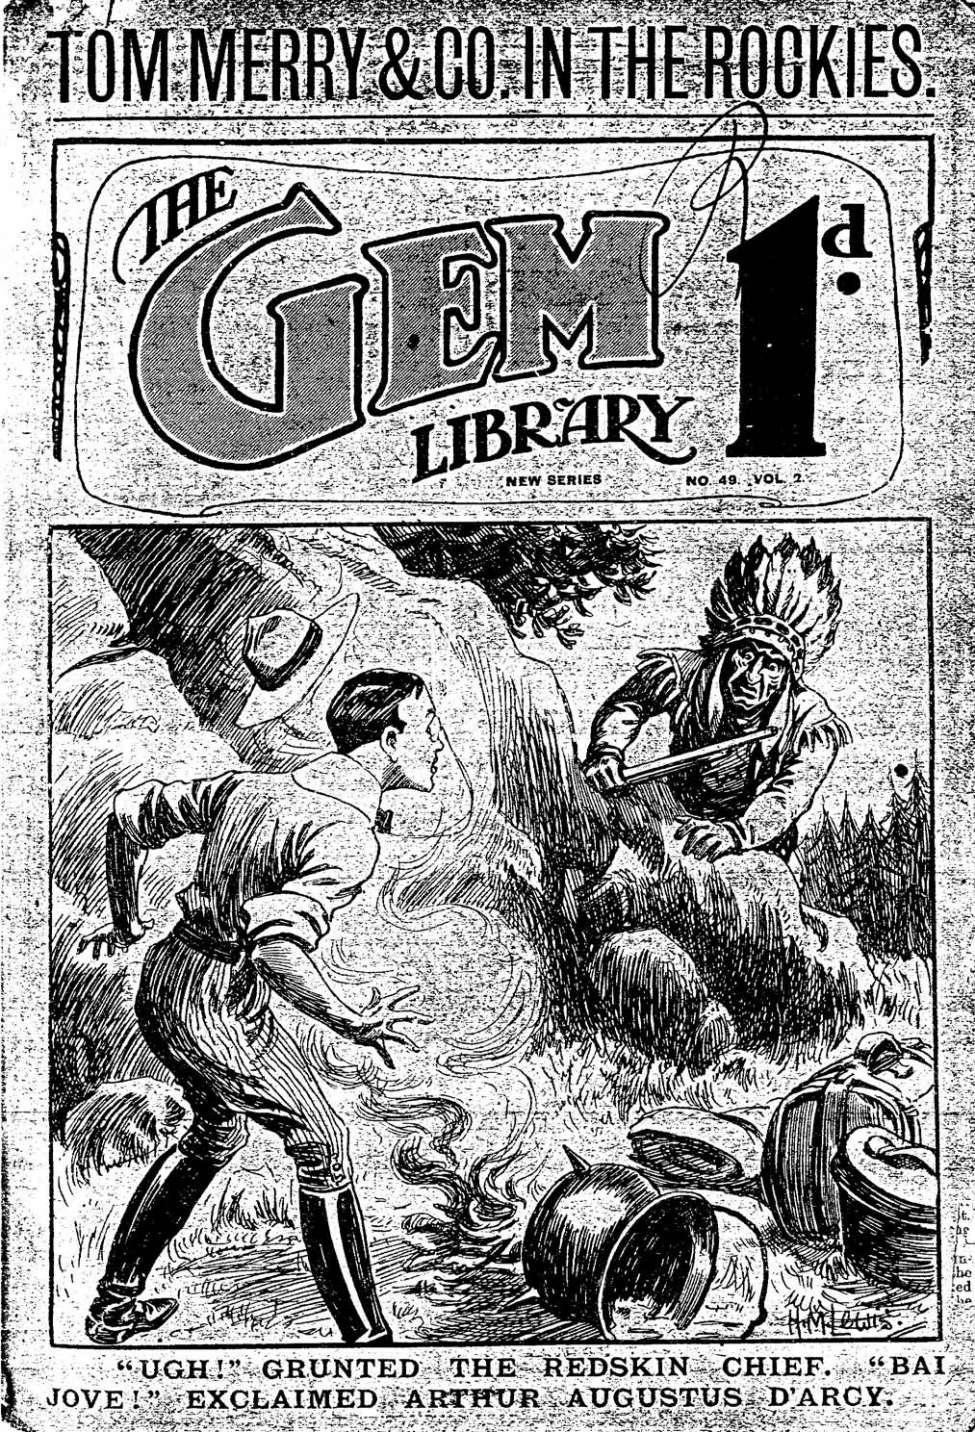 Comic Book Cover For The Gem v2 49 - Tom Merry in the Rockies